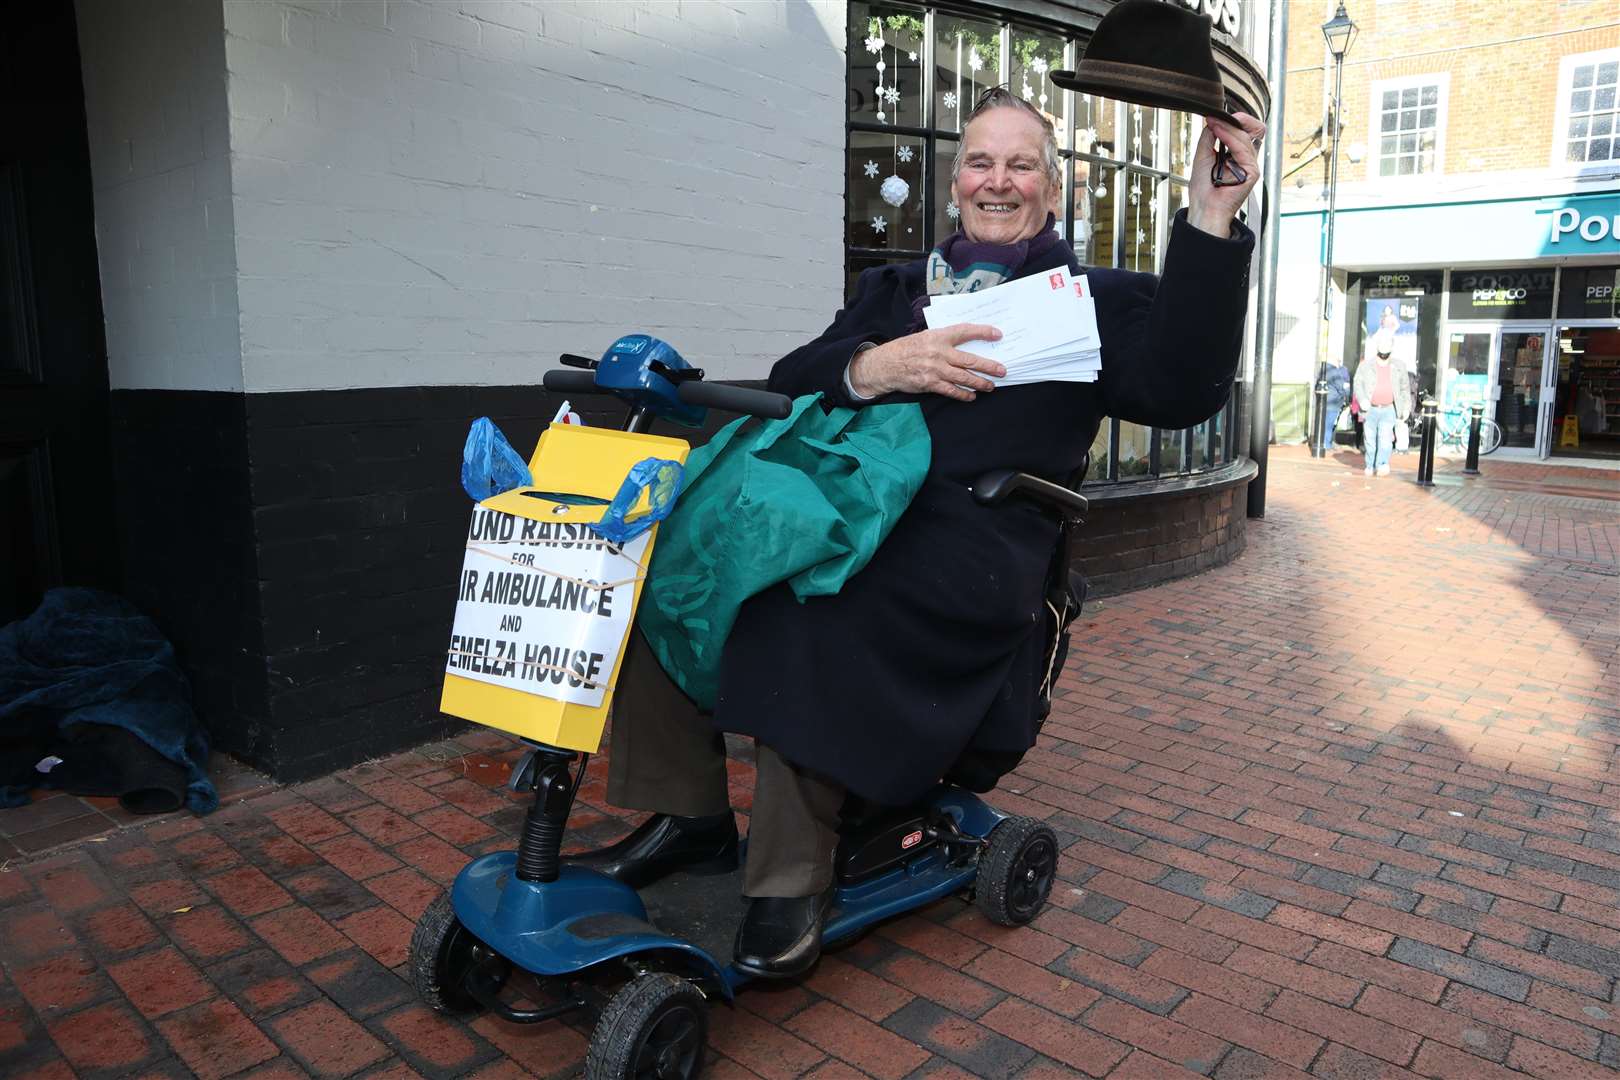 Sittingbourne's 'whistling postman' Dale Howting, pictured with some of cheques he will be posting along with his new electric mobility scooter, has collected £12,800 for charity this year